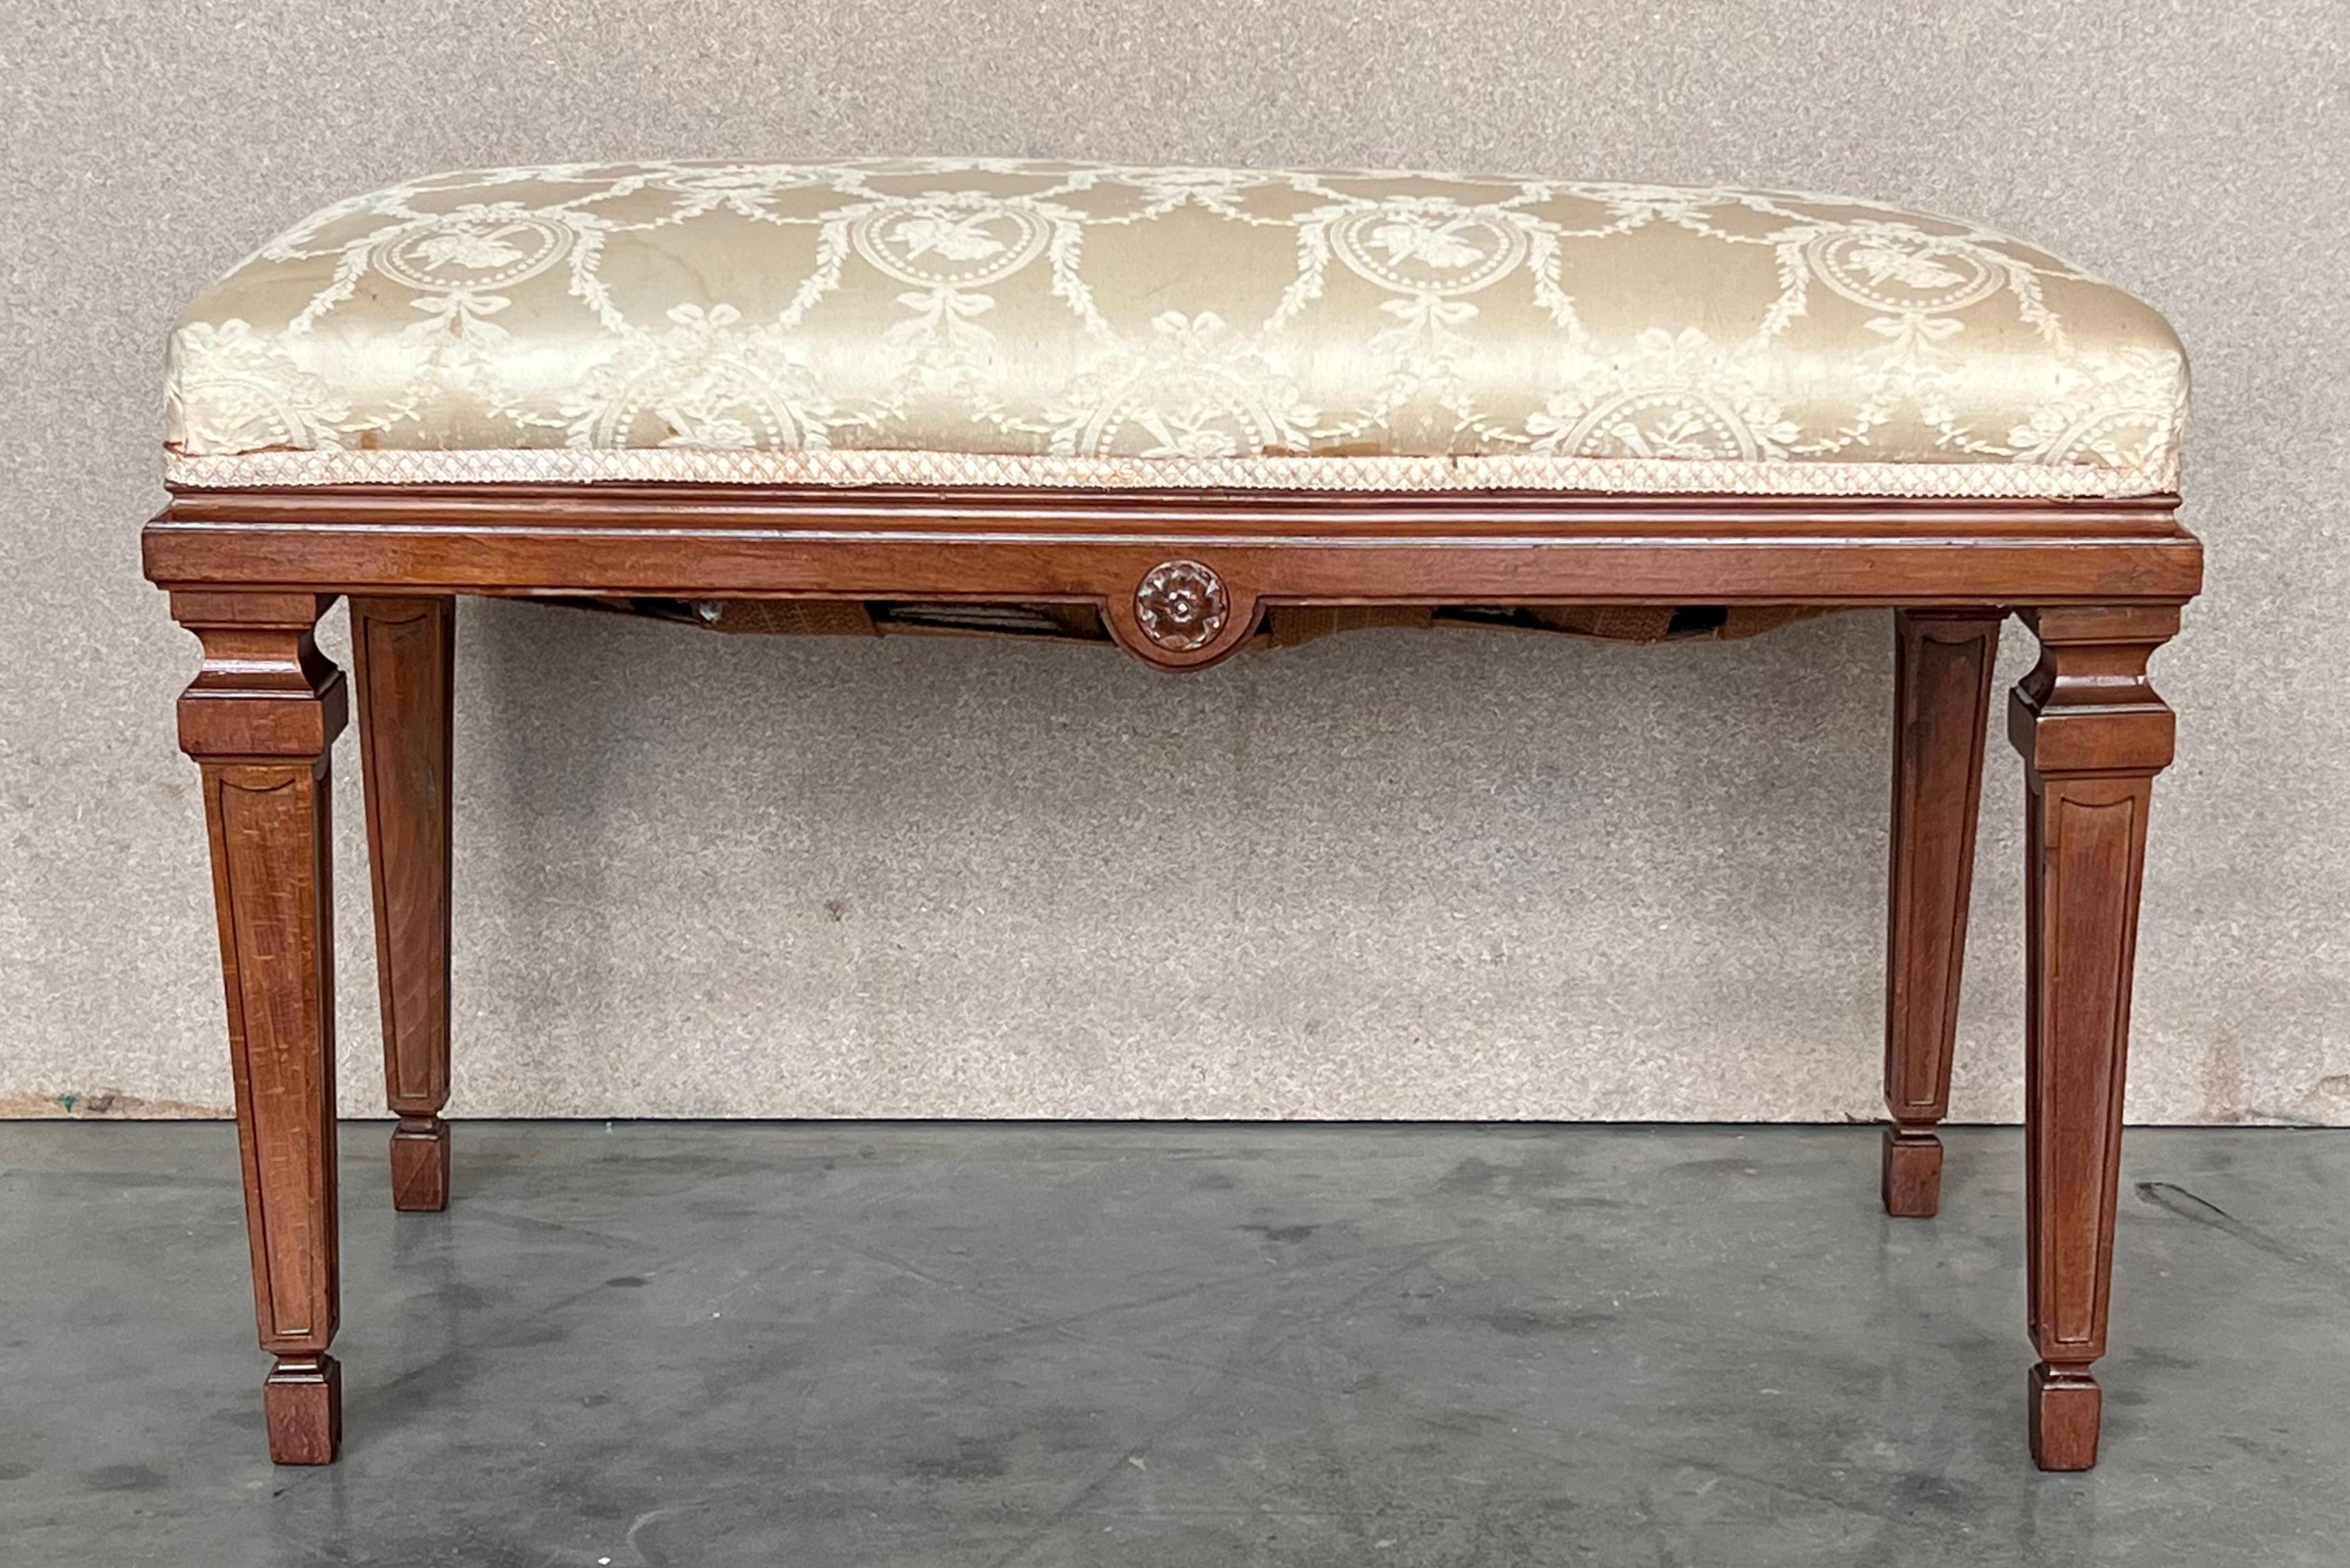 A pair of French Neoclassical style wood benches from the early 20th century, with carved Vitruvian scroll frieze, fluted legs and custom upholstery. This pair of French Neoclassical style wood benches, crafted in the early 20th century, exudes